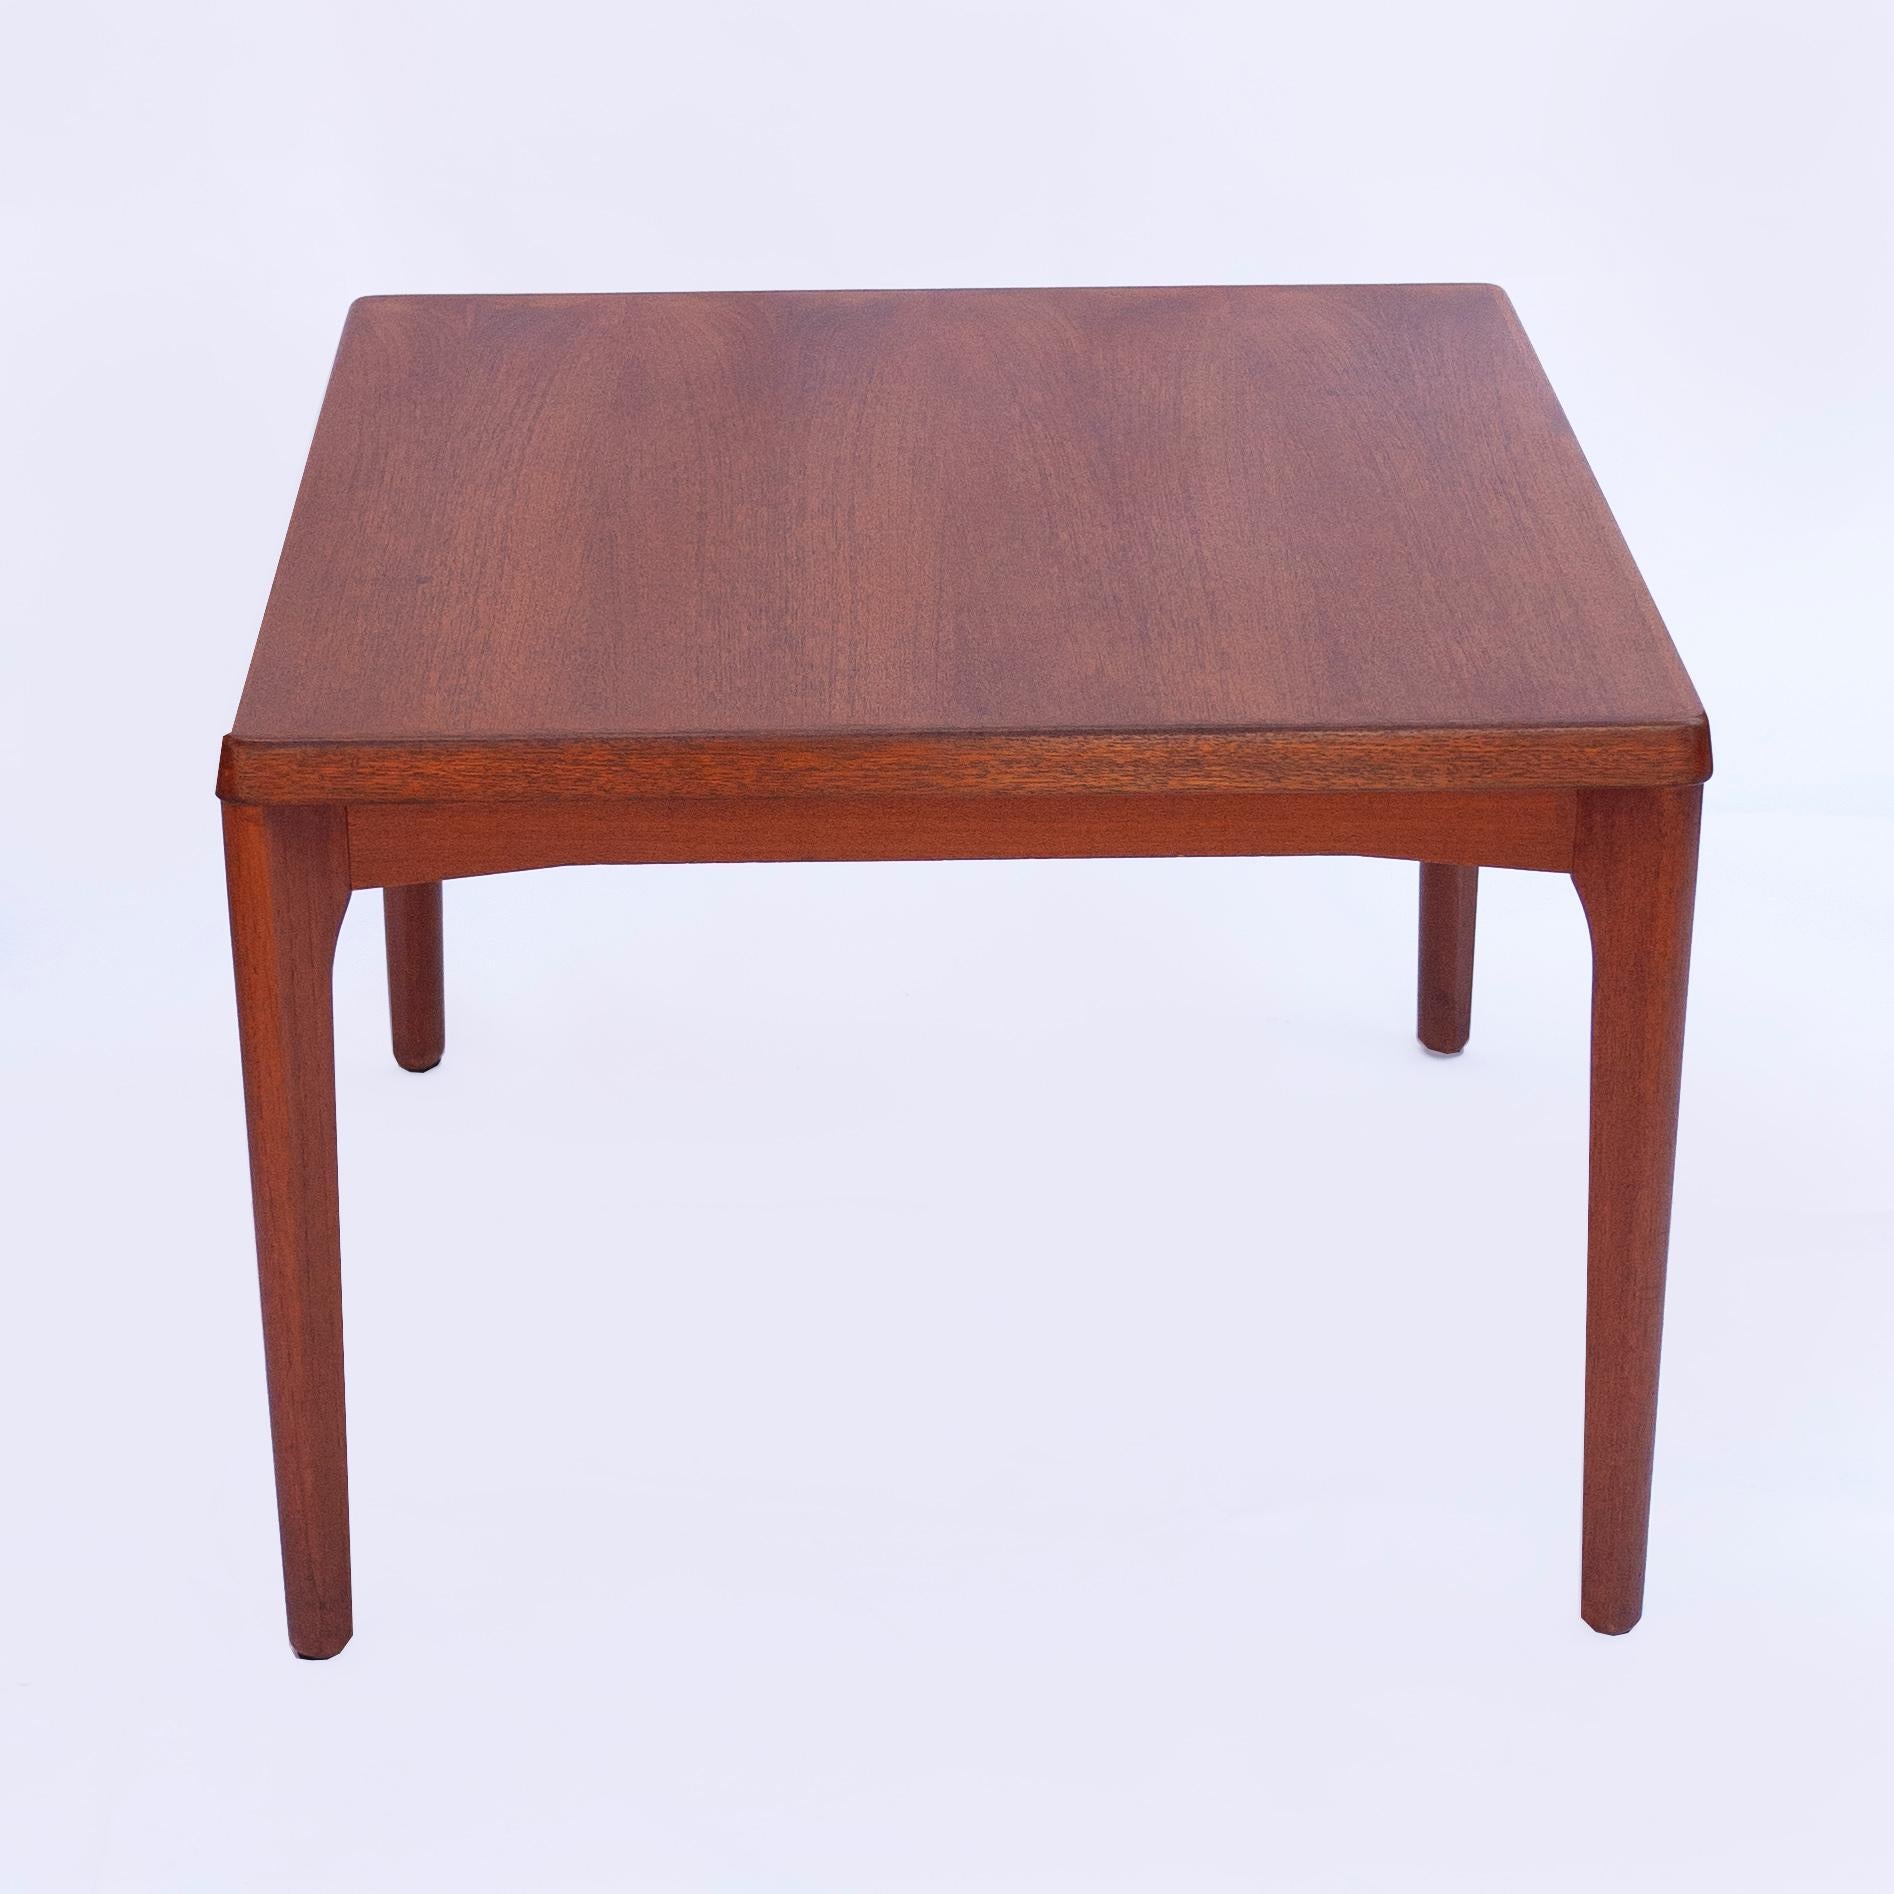 A square teak coffee table from the 1960s.

Designer - Henning Kjærnulf

Manufacturer -Vejle Stole & Møbelfabrik

Design Period - 1960 to 1969

Country of Manufacture - Denmark

Attribution Marks - Under Table

Detailed Condition - Good